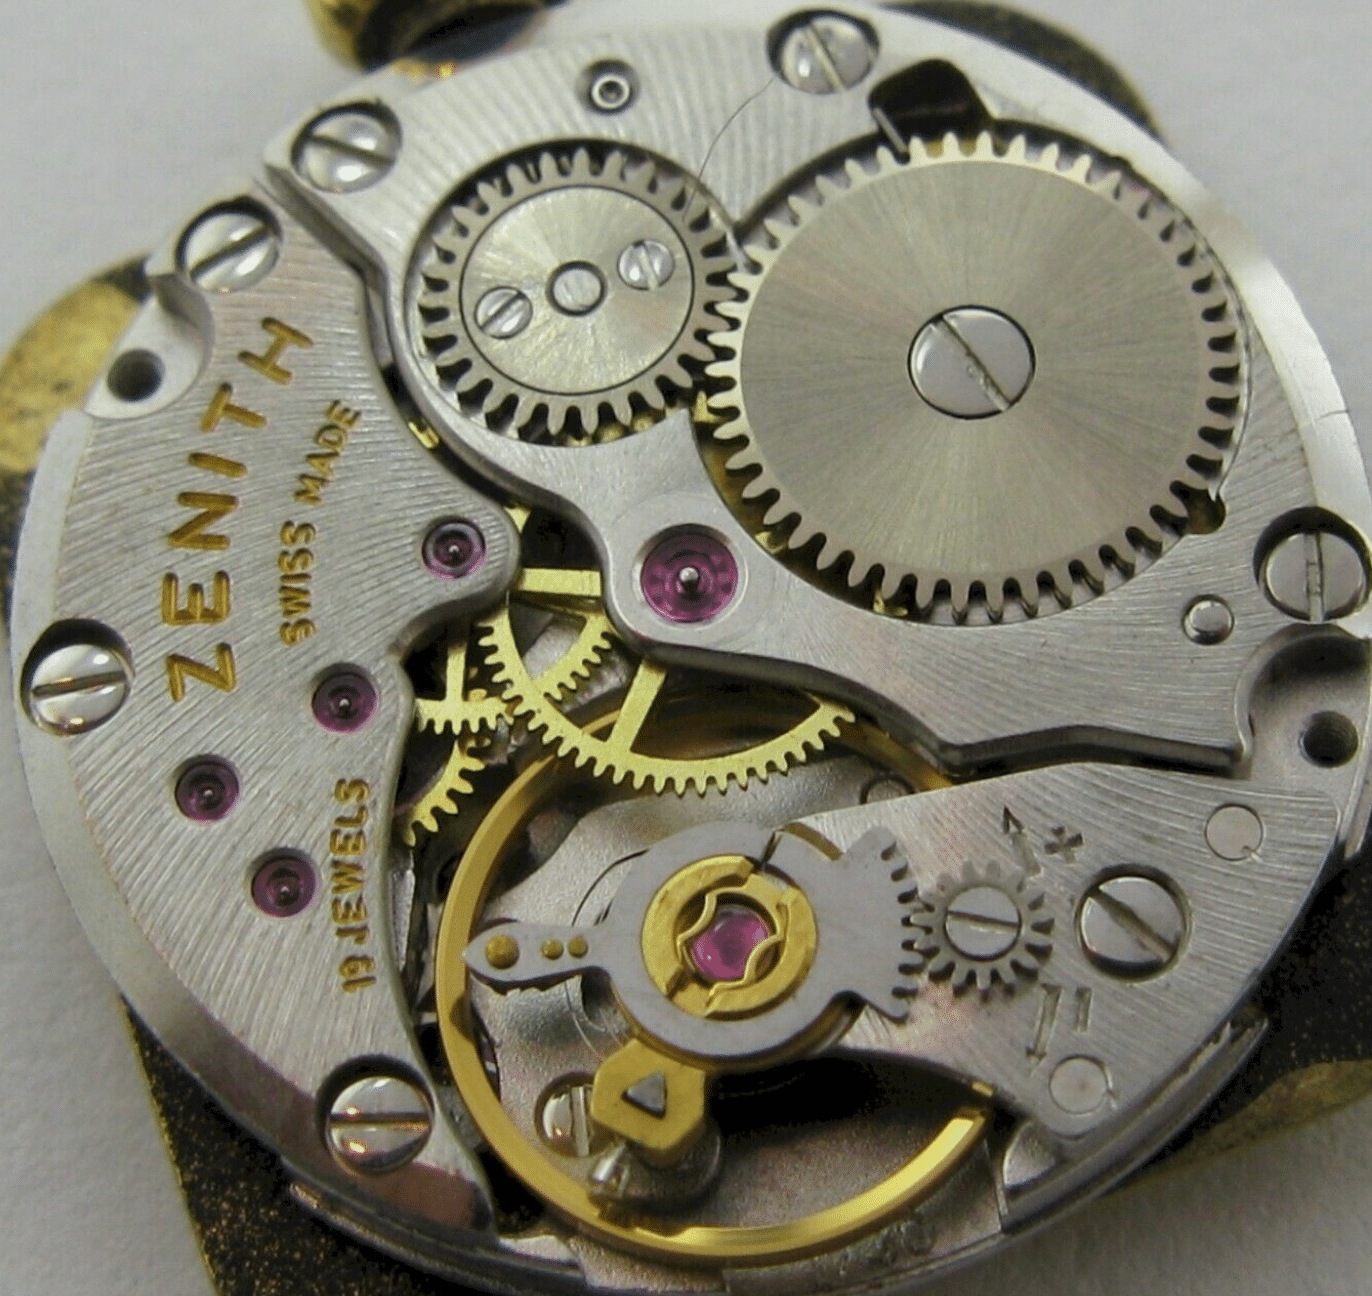 Zenith caliber 1730 movement – specifications and photo